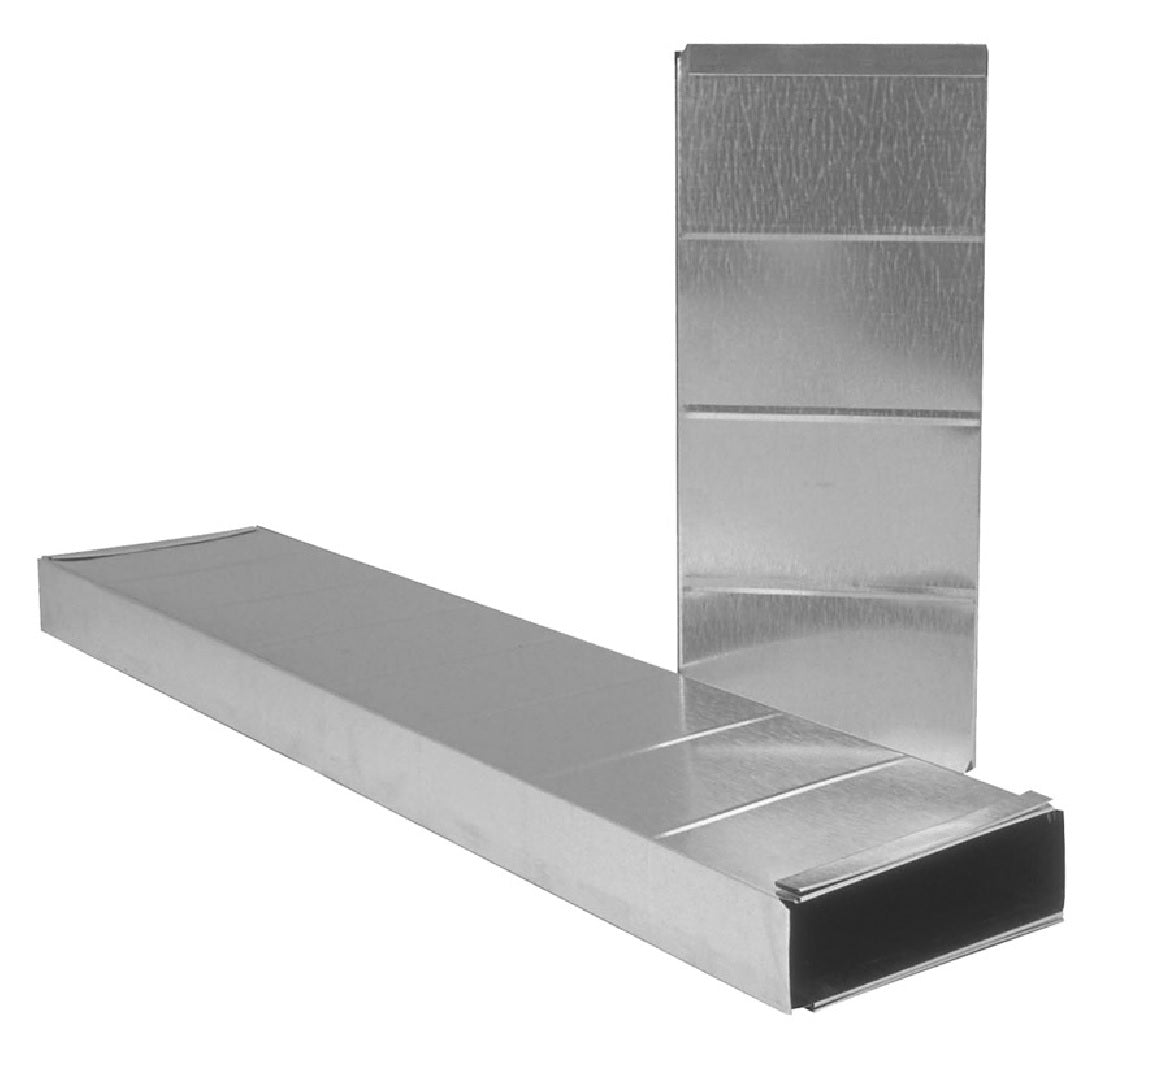 Imperial GV0220 Stack Duct, Steel